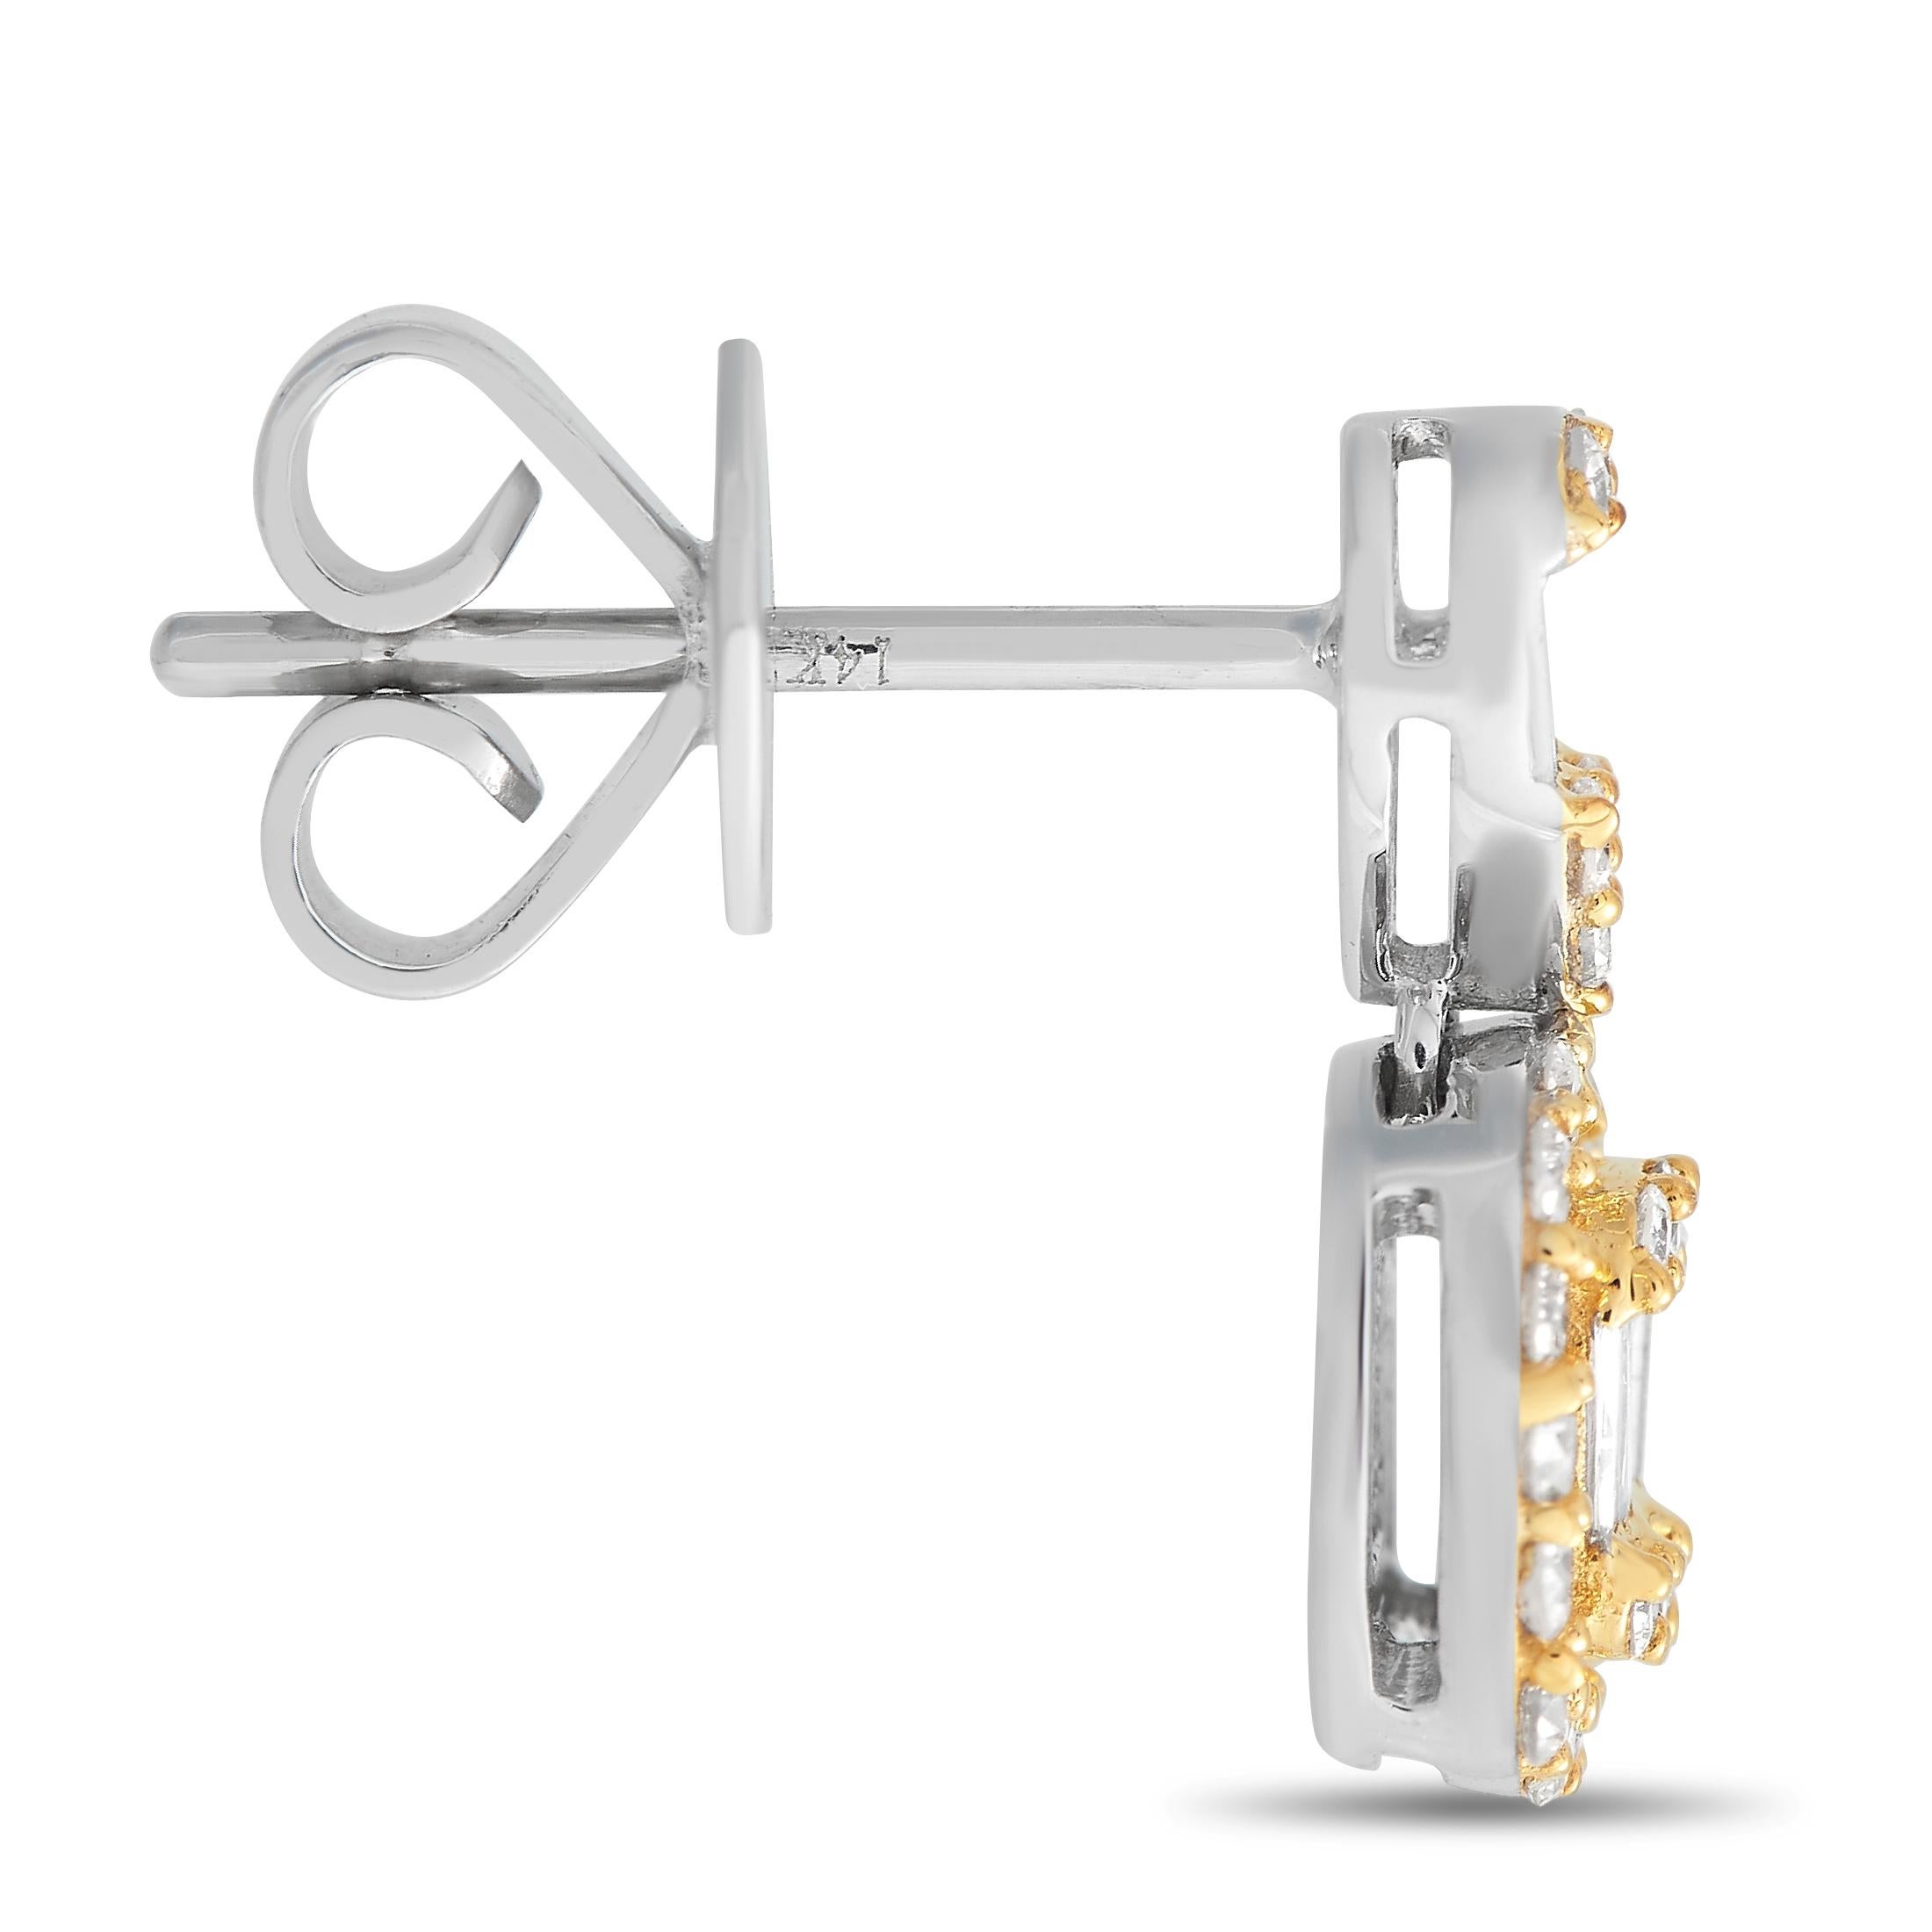 These impressive earrings will add a touch of sparkle to any ensemble. Each one features a statement-making setting crafted from a combination of 14K white gold and 14K yellow gold that measures 0.5” long by 0.25” wide. Diamonds with a total weight